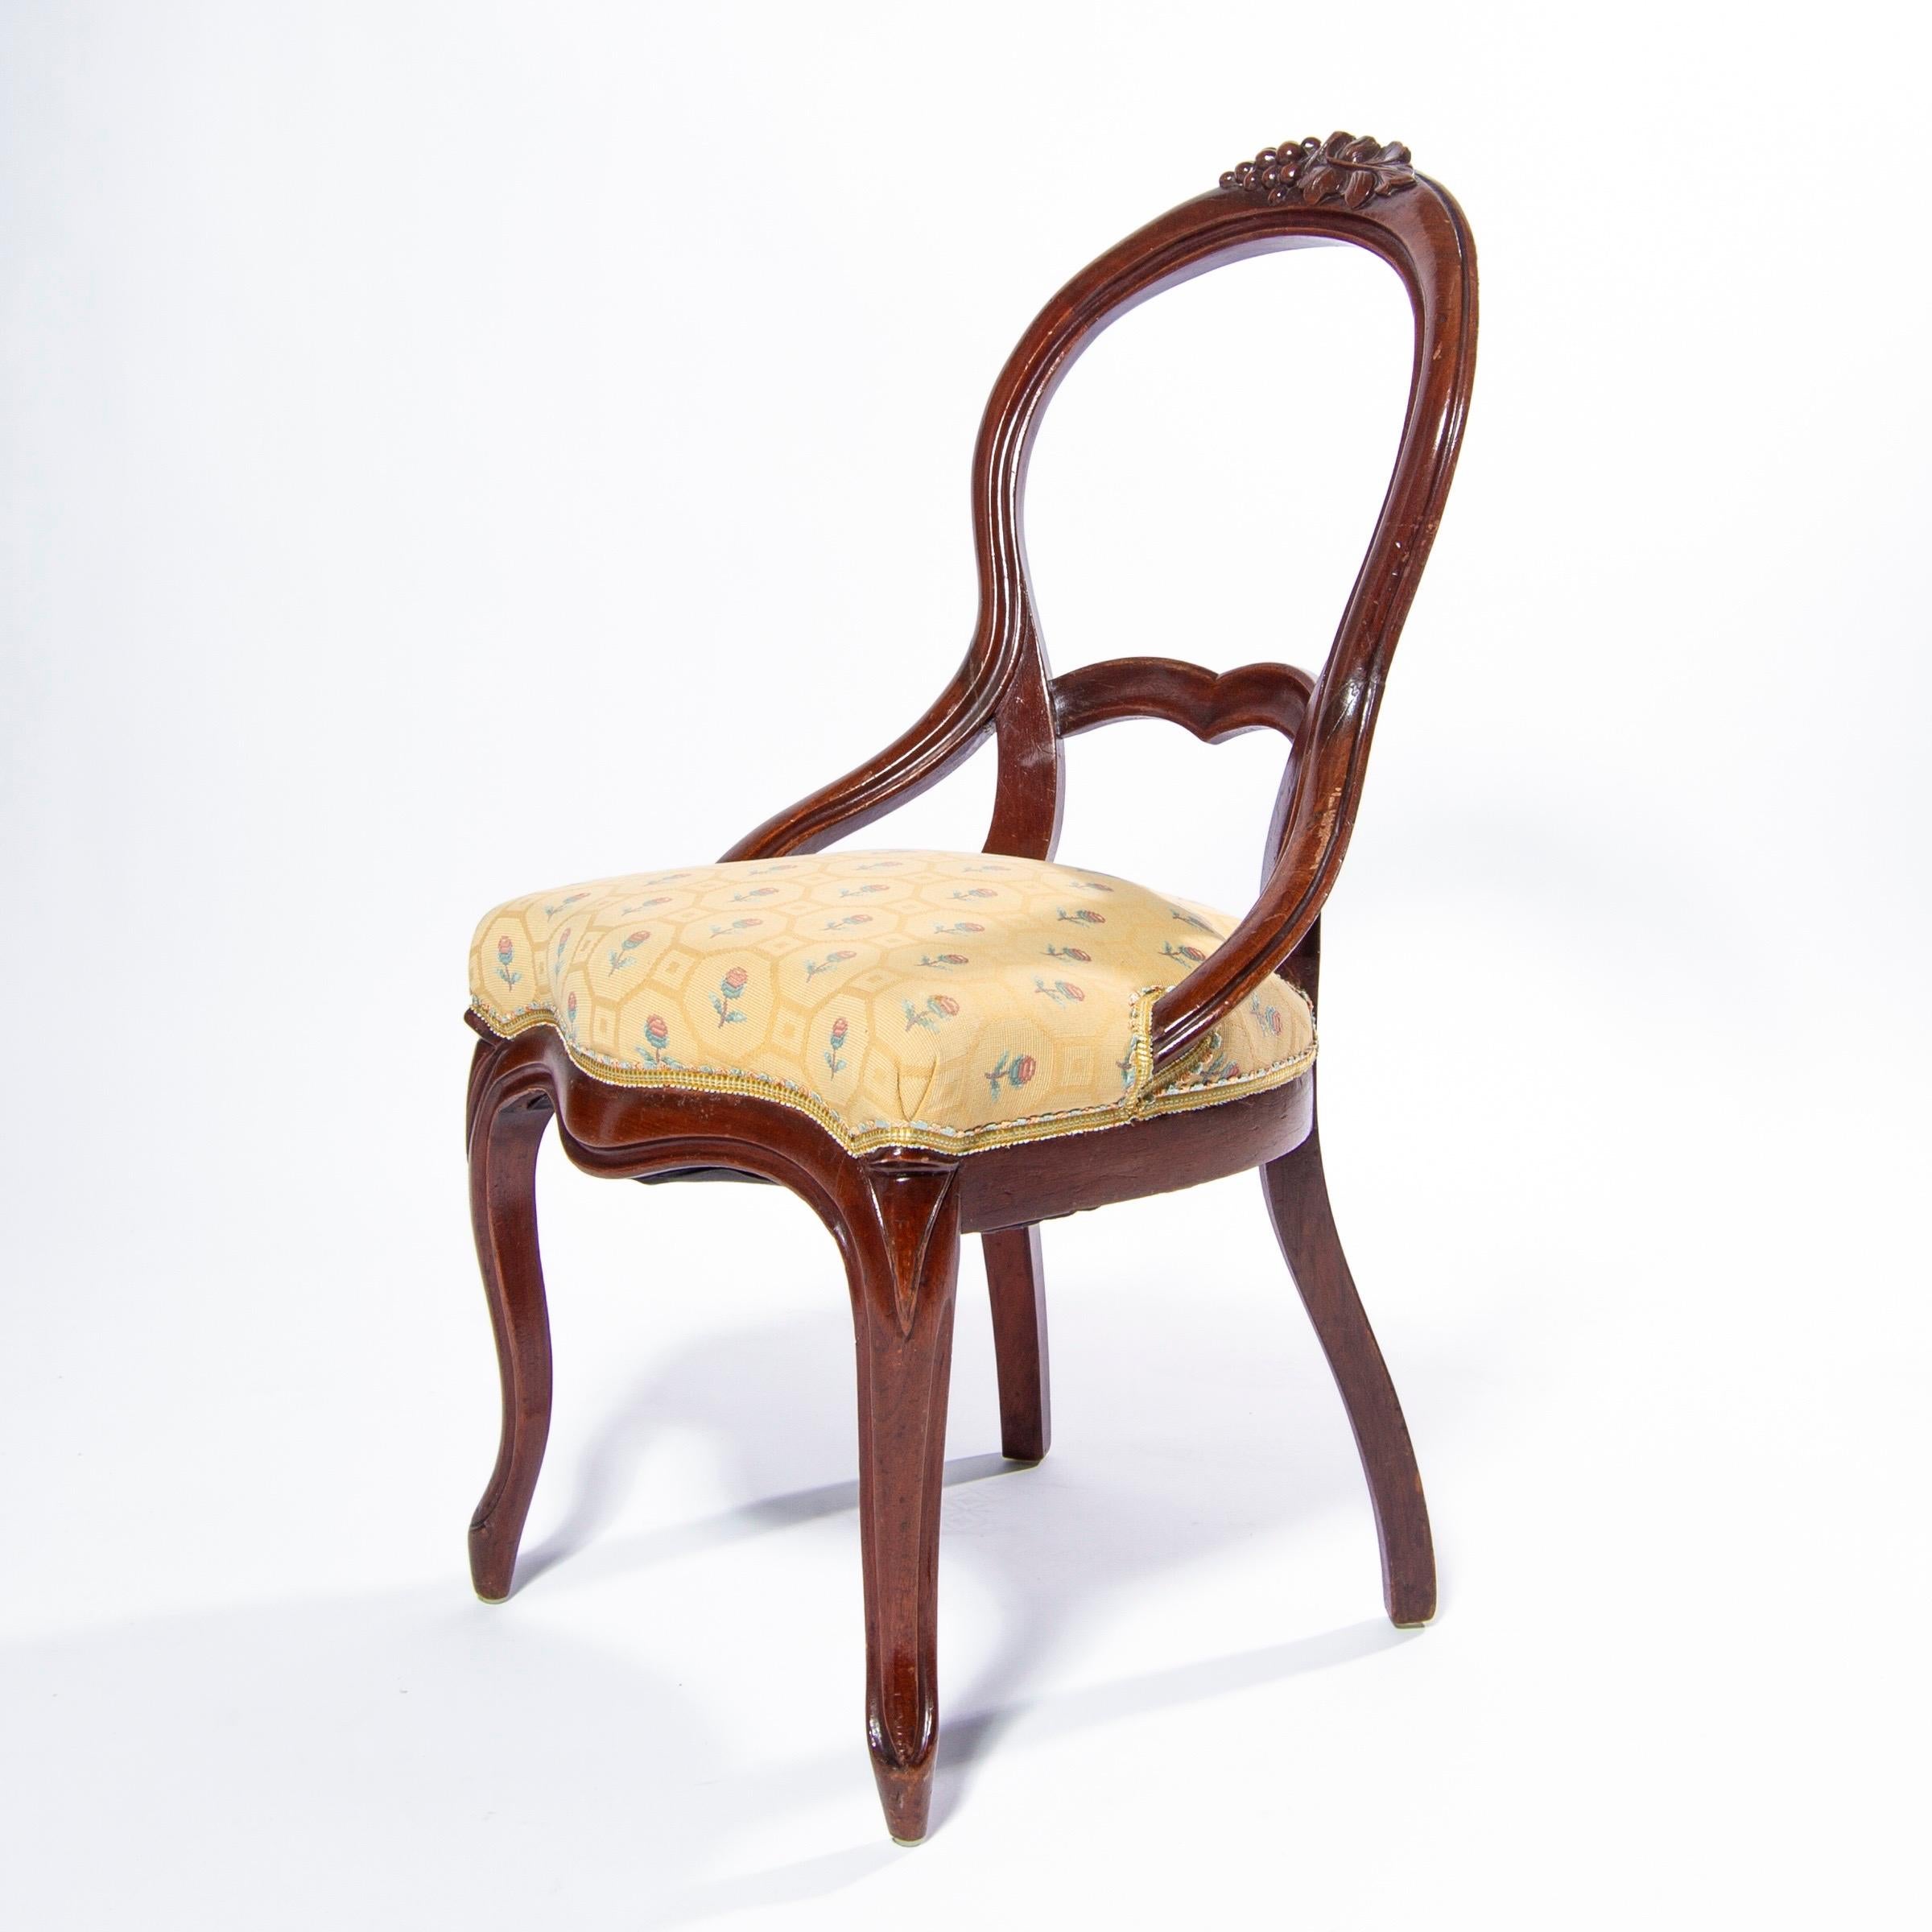 Exceptional Queen Anne chair rendered in walnut with a hand carved grape motif and woven fabric with ribbon trim, England.